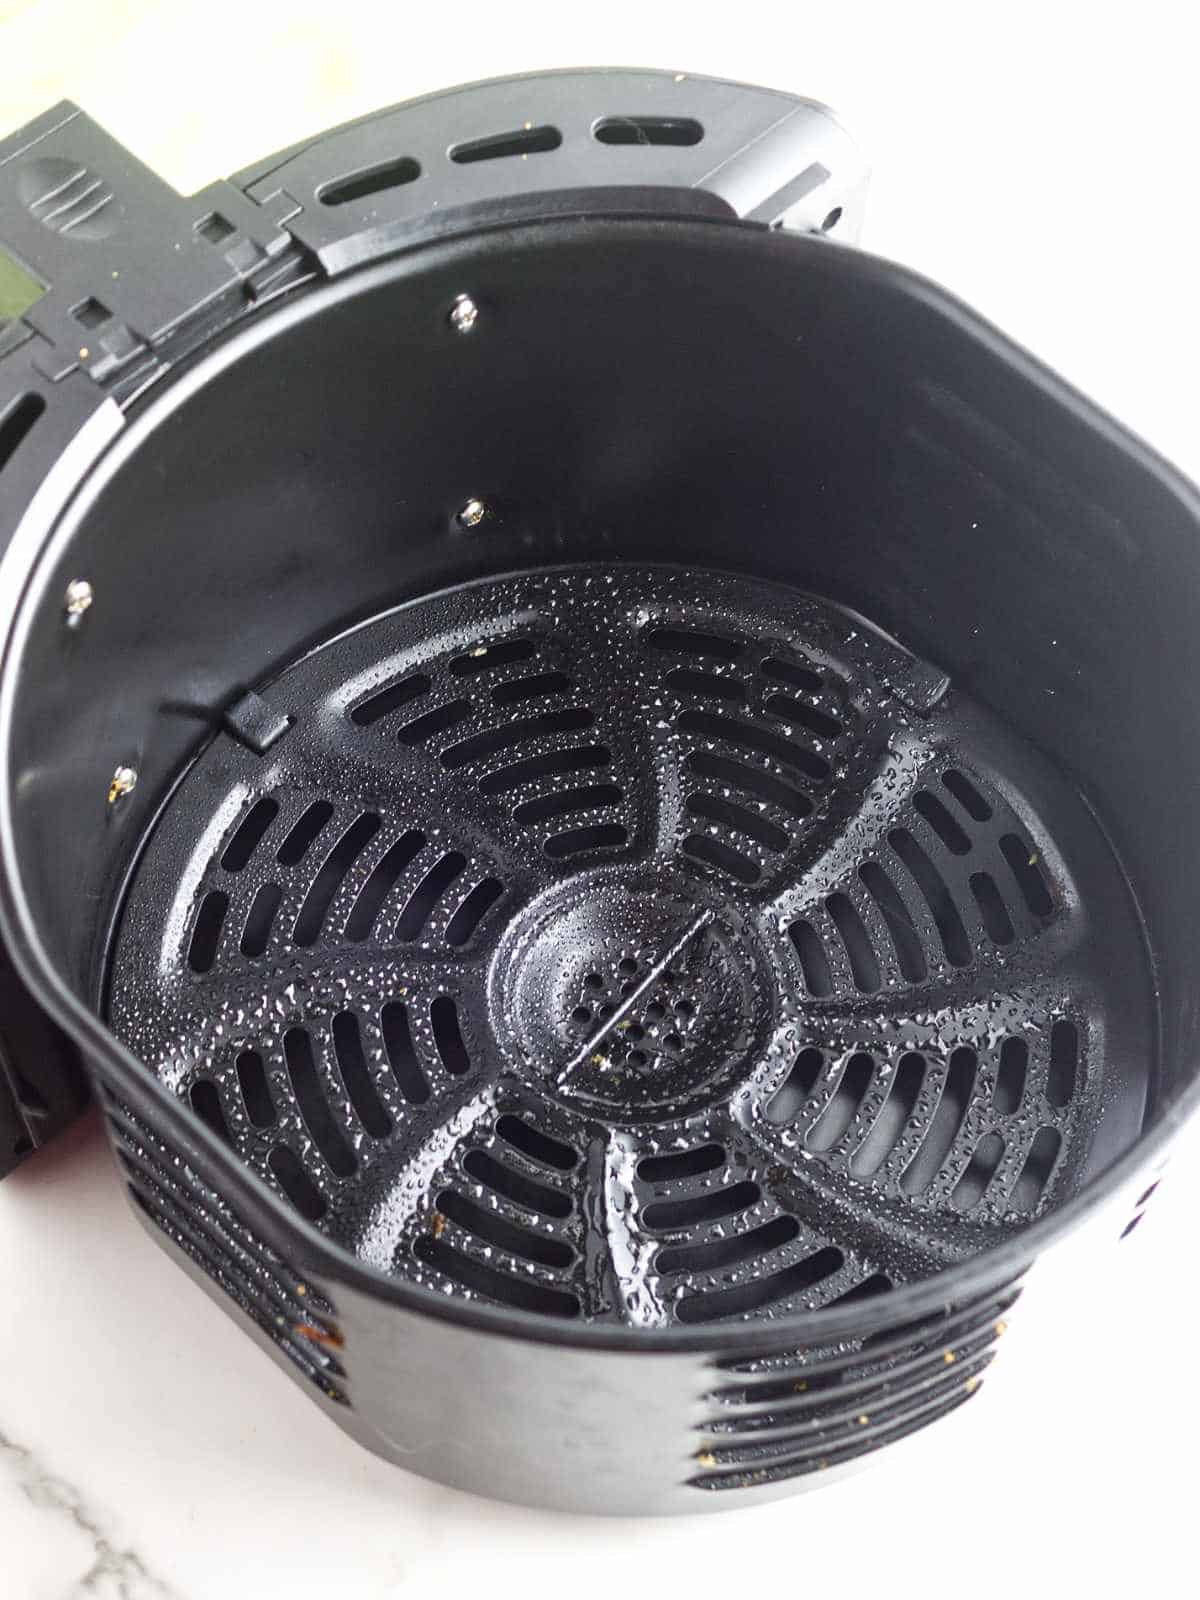 air fryer basket with non stick spray grill inside of basket.